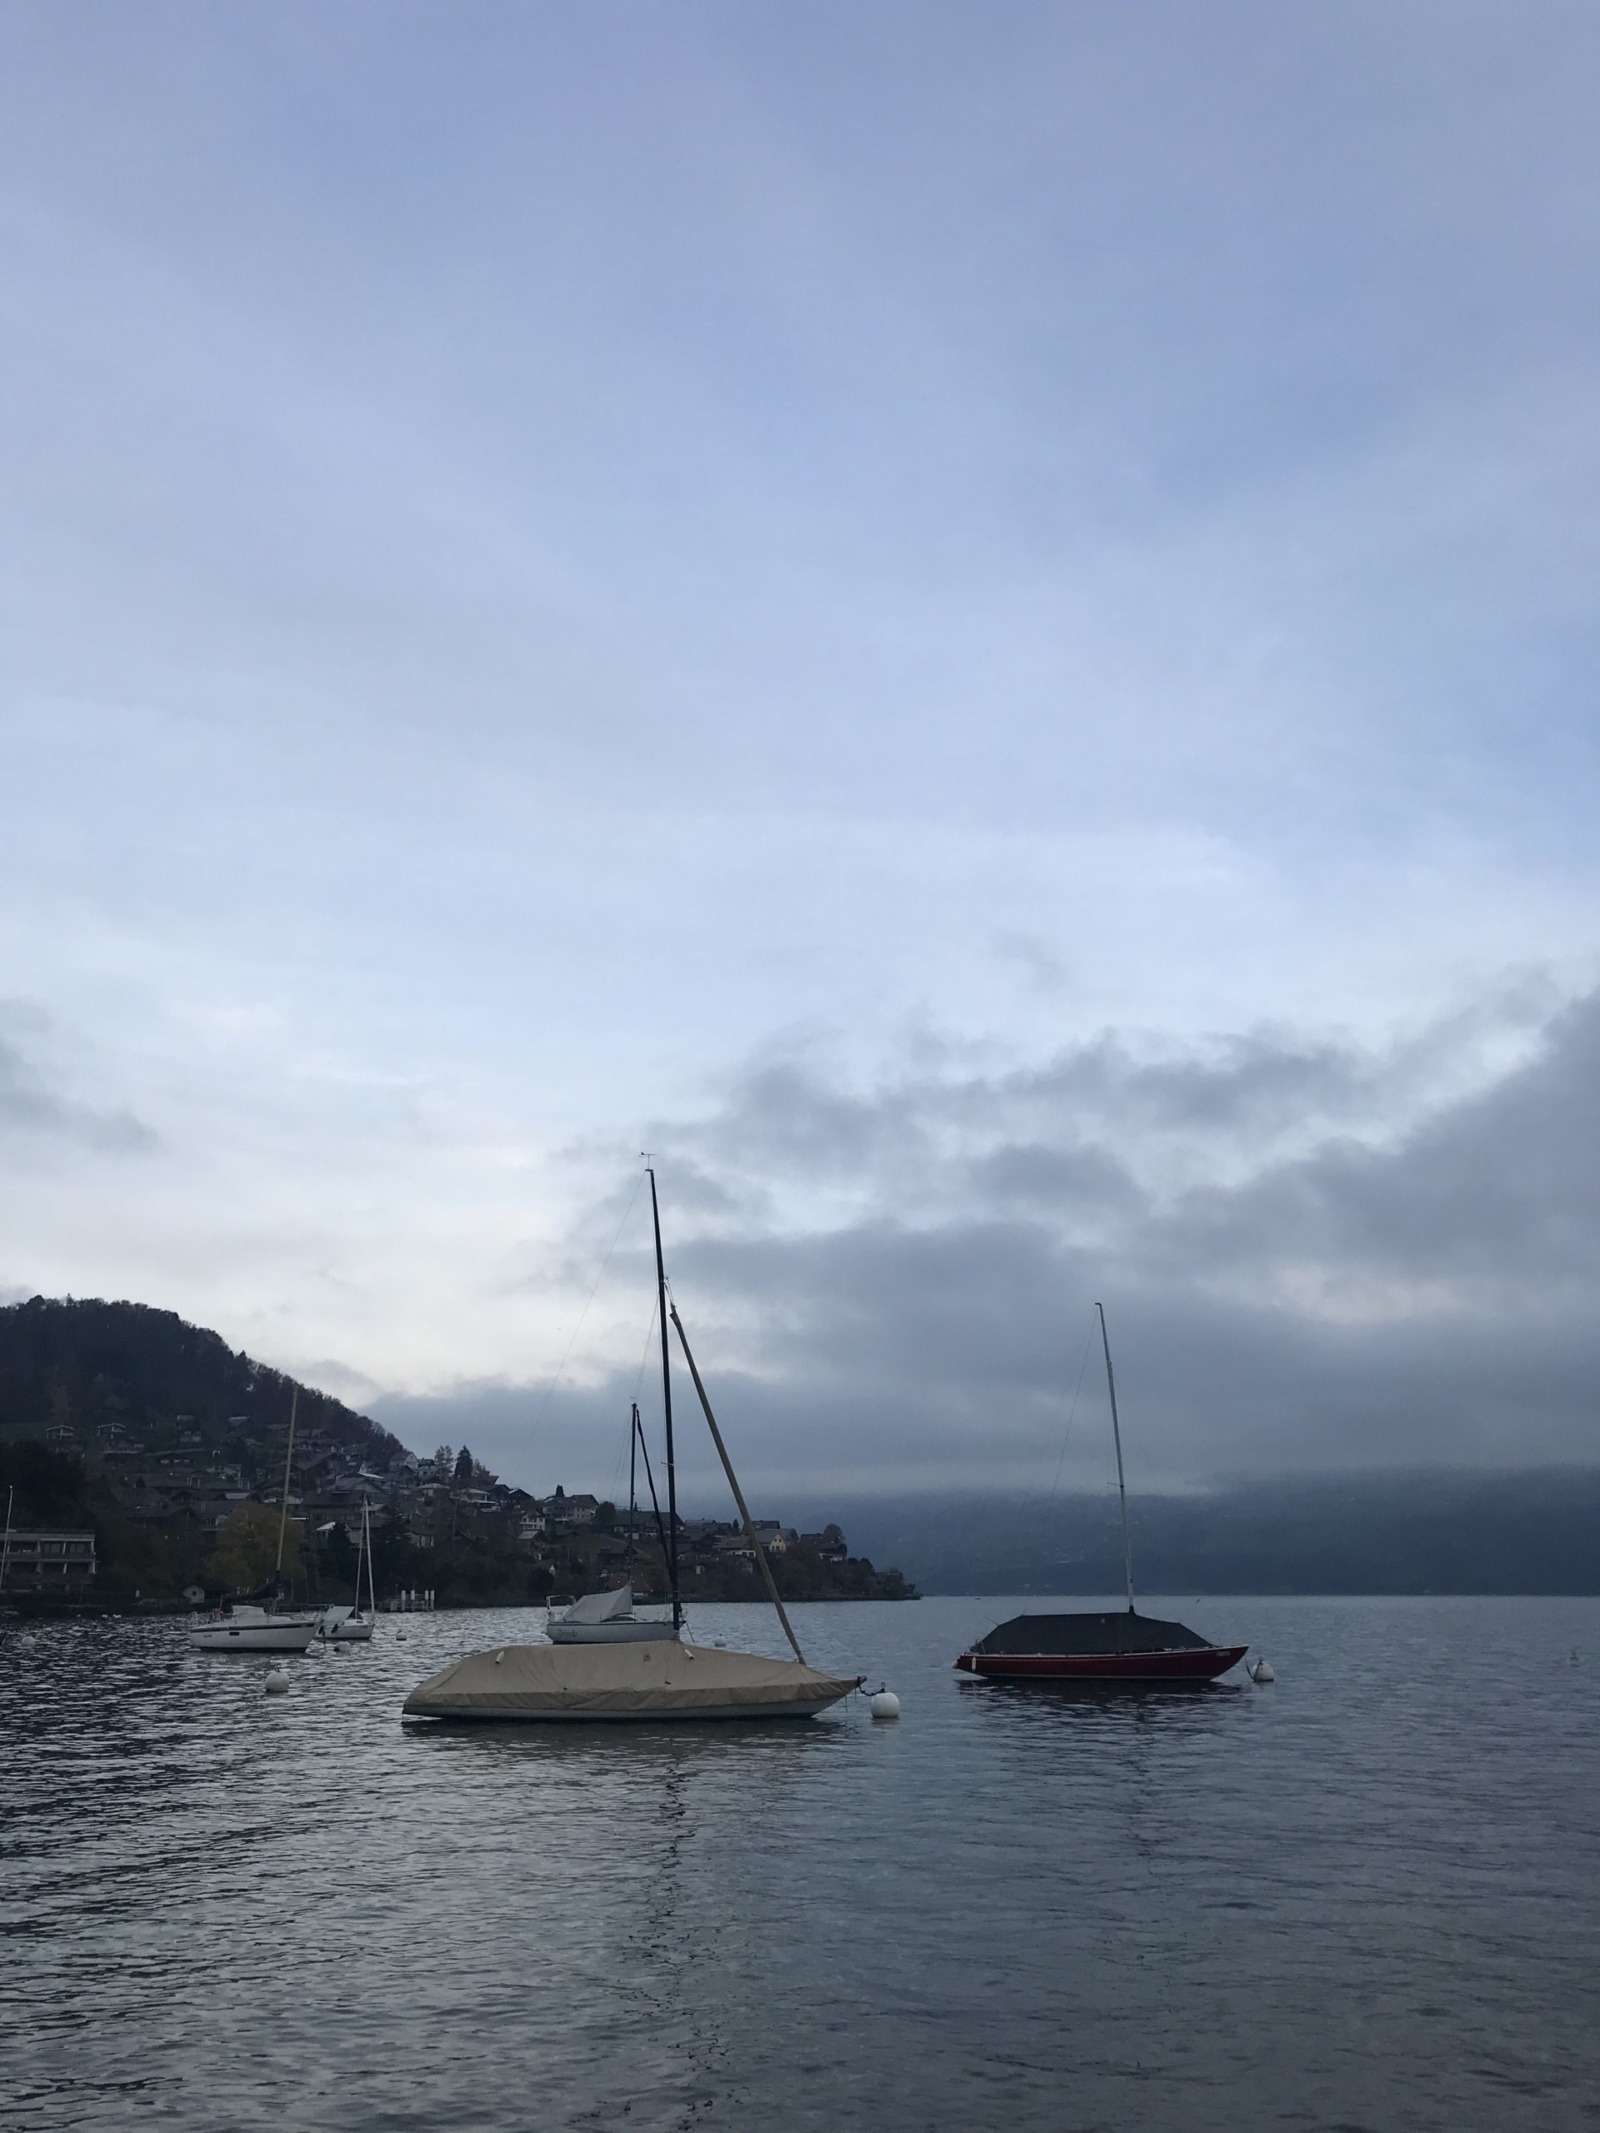 Faulensee on a grey autumn morning